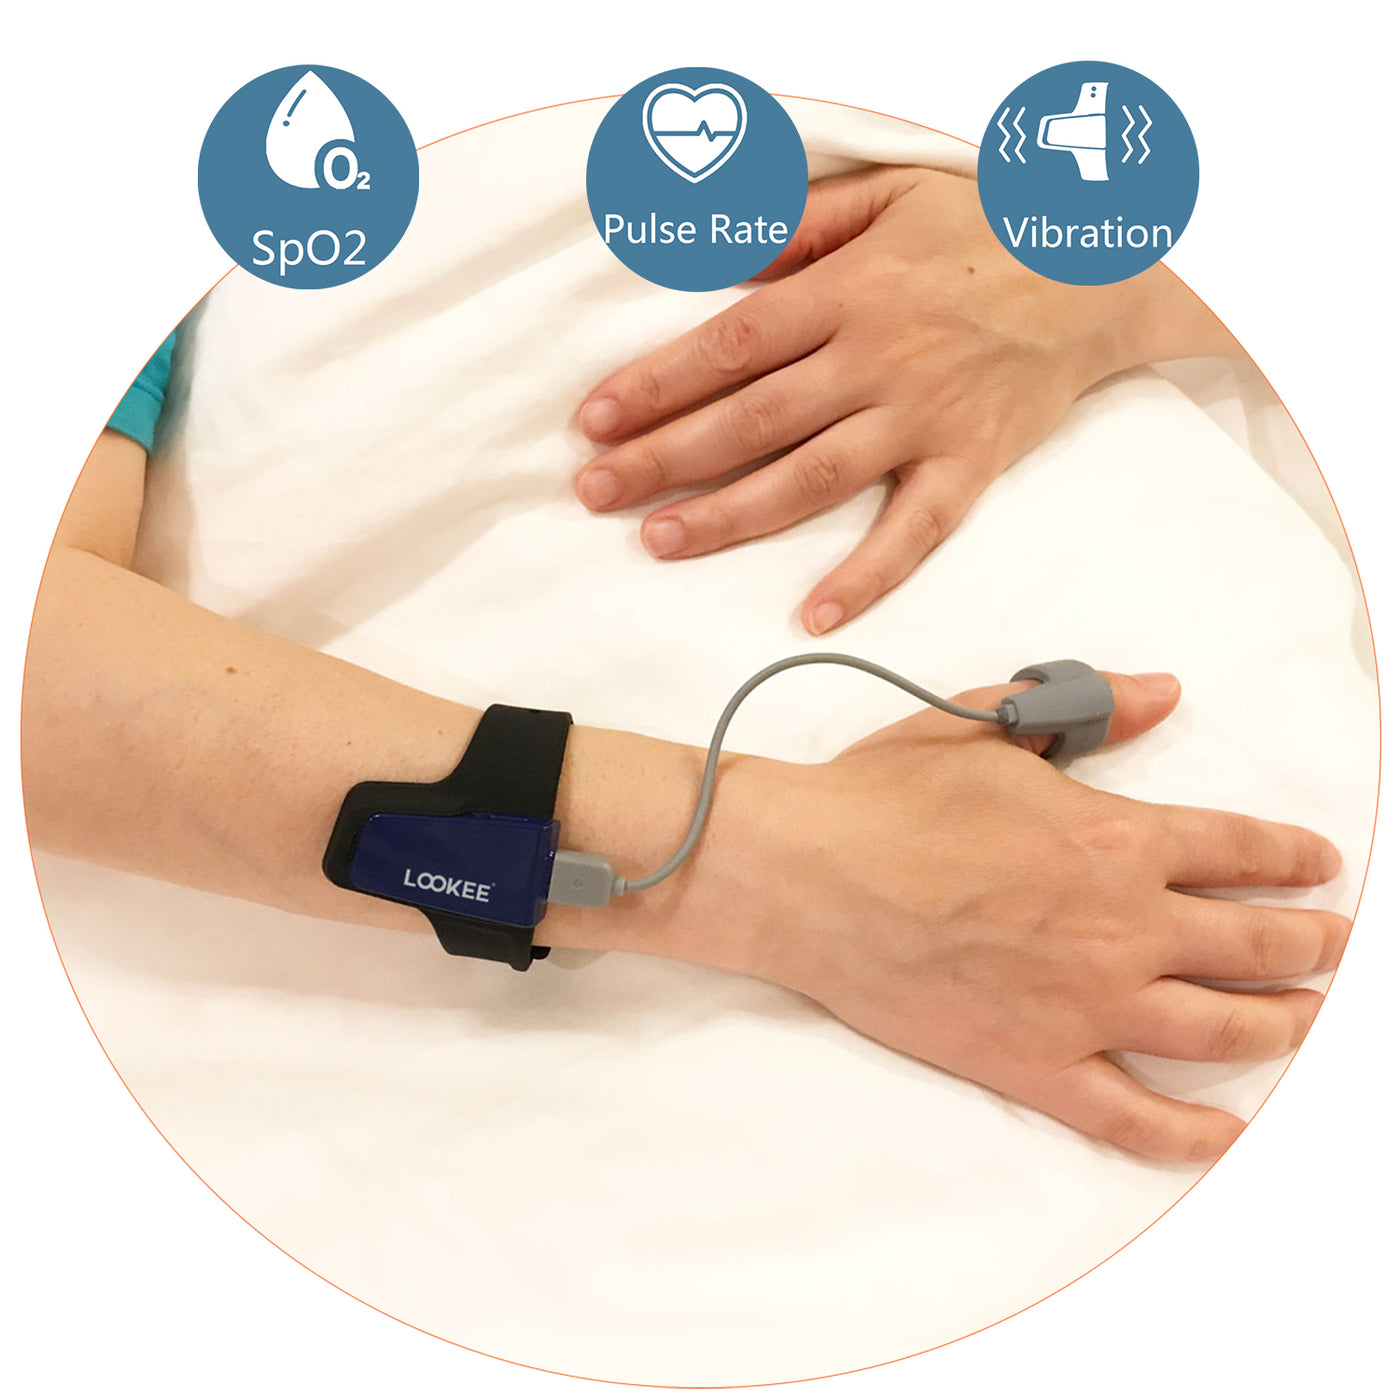 LOOKEE® Wrist Sleep Oxygen Monitor with Vibration Alarm for Apnea Events & Low O2 | Overnight Pulse Oximeter Tracks Blood Oxygen Level and Heart Rate